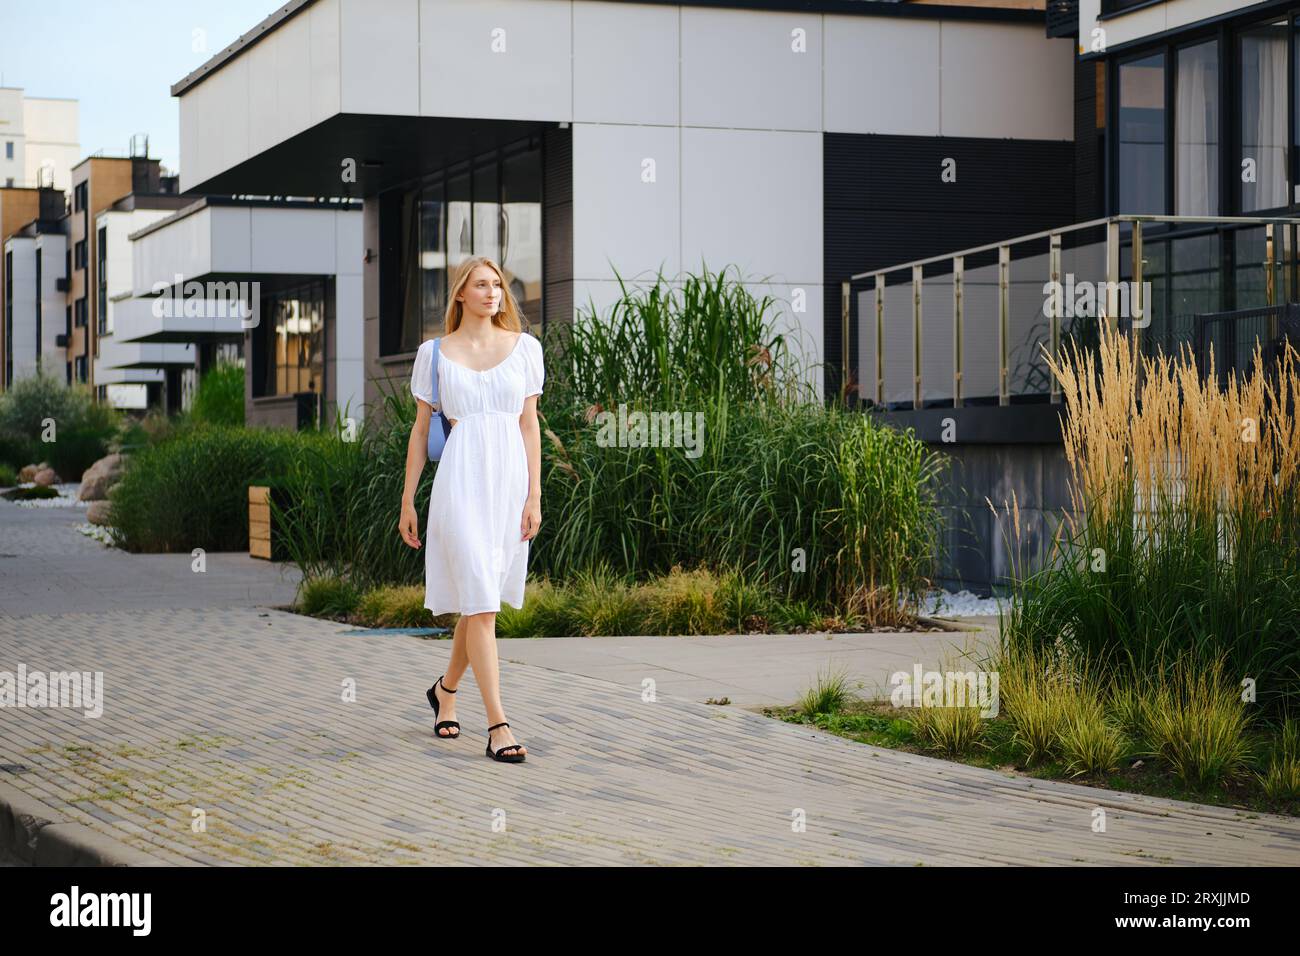 Blonde woman walking along the pavement in modern residential area Stock Photo